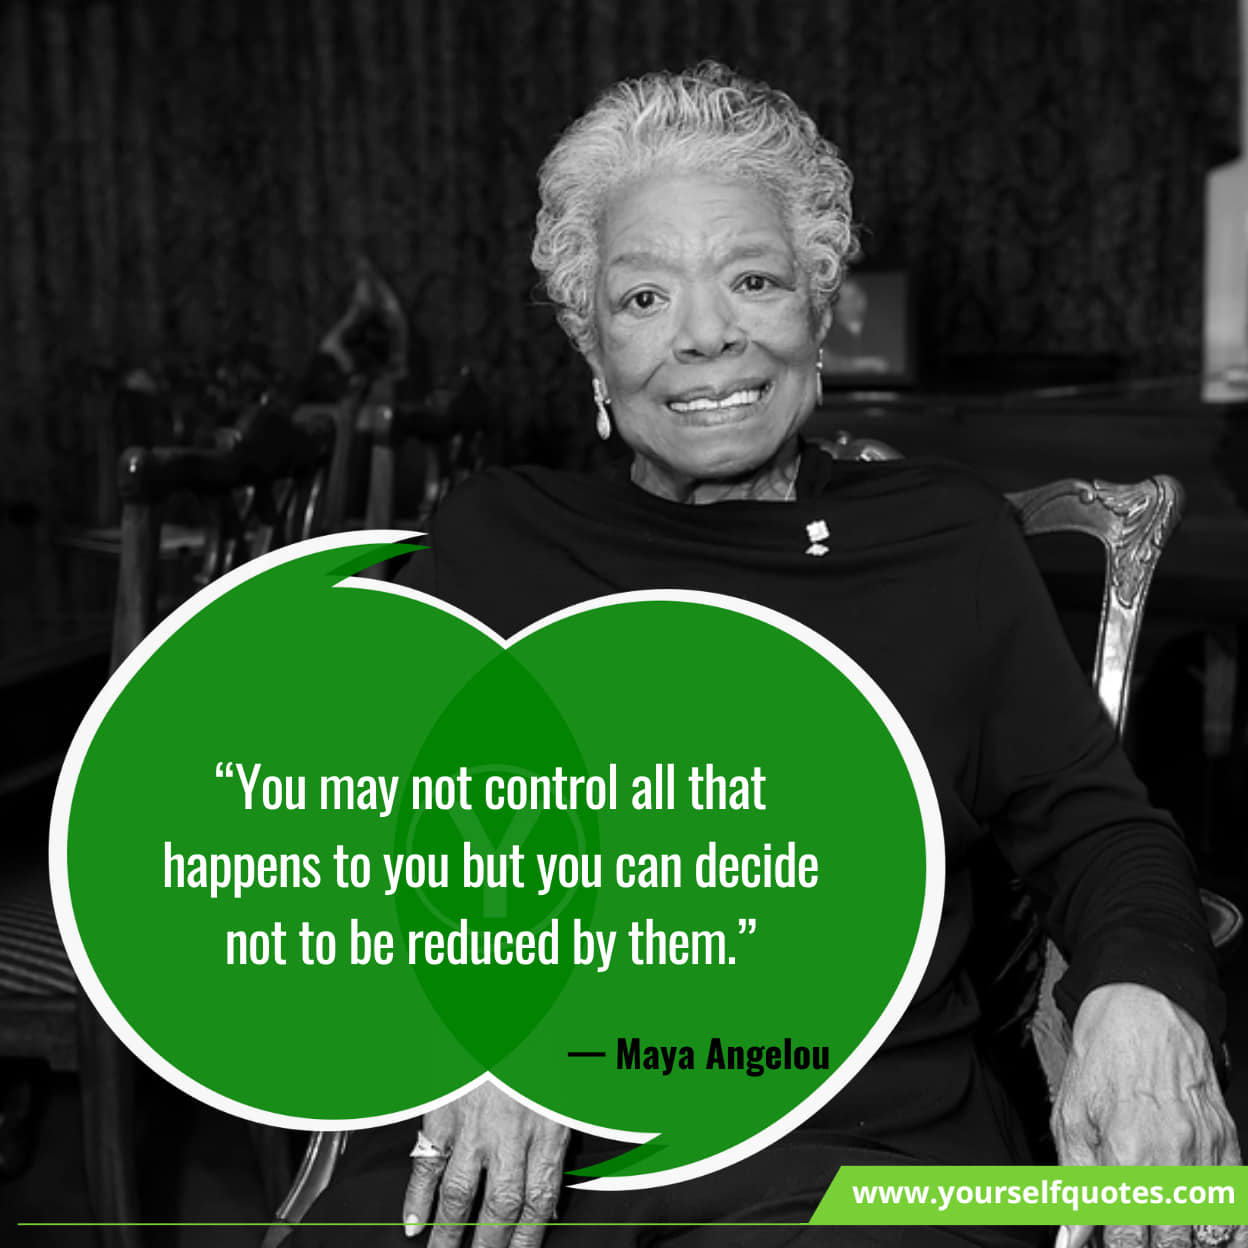 Inspirational quotes by Maya Angelou